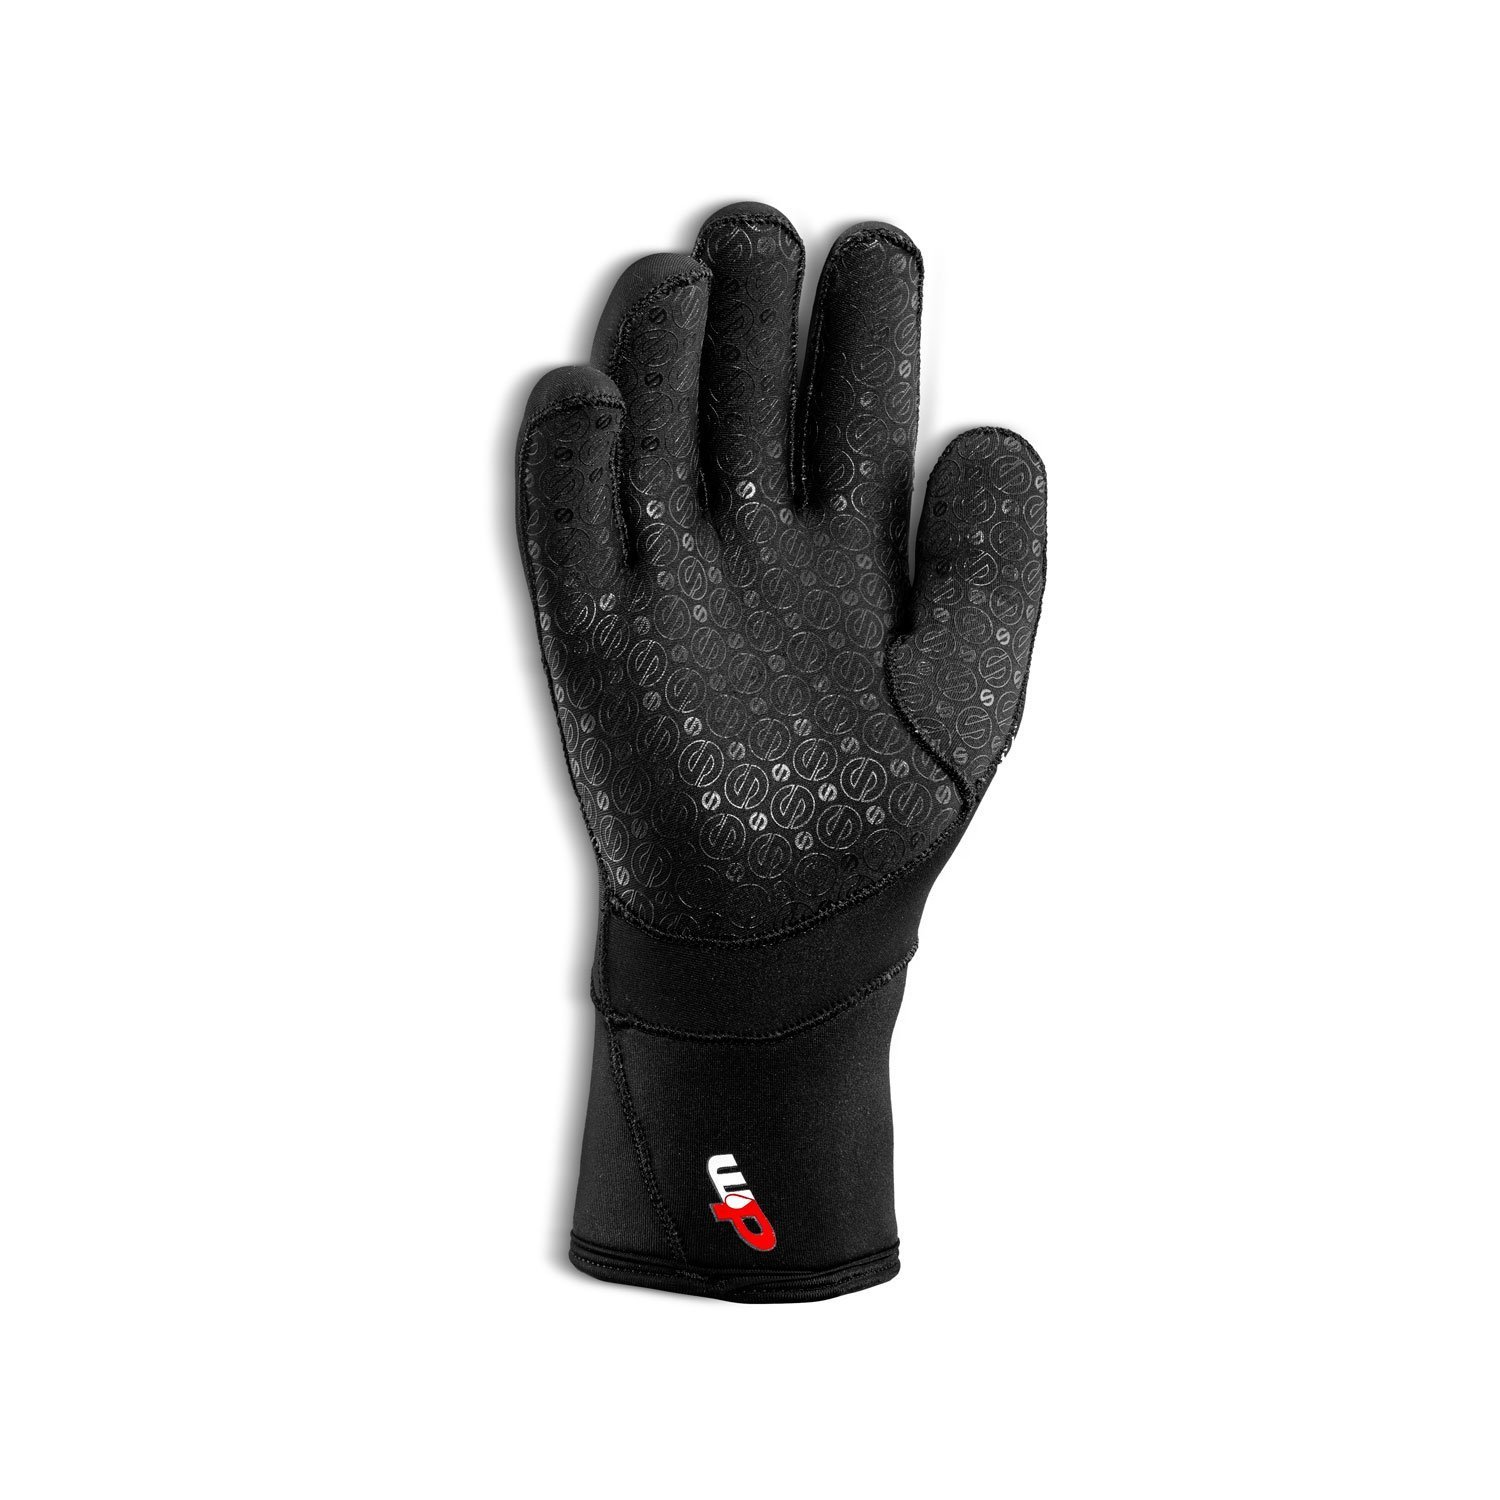 Sparco Italy Karting Gloves CRW NEW black